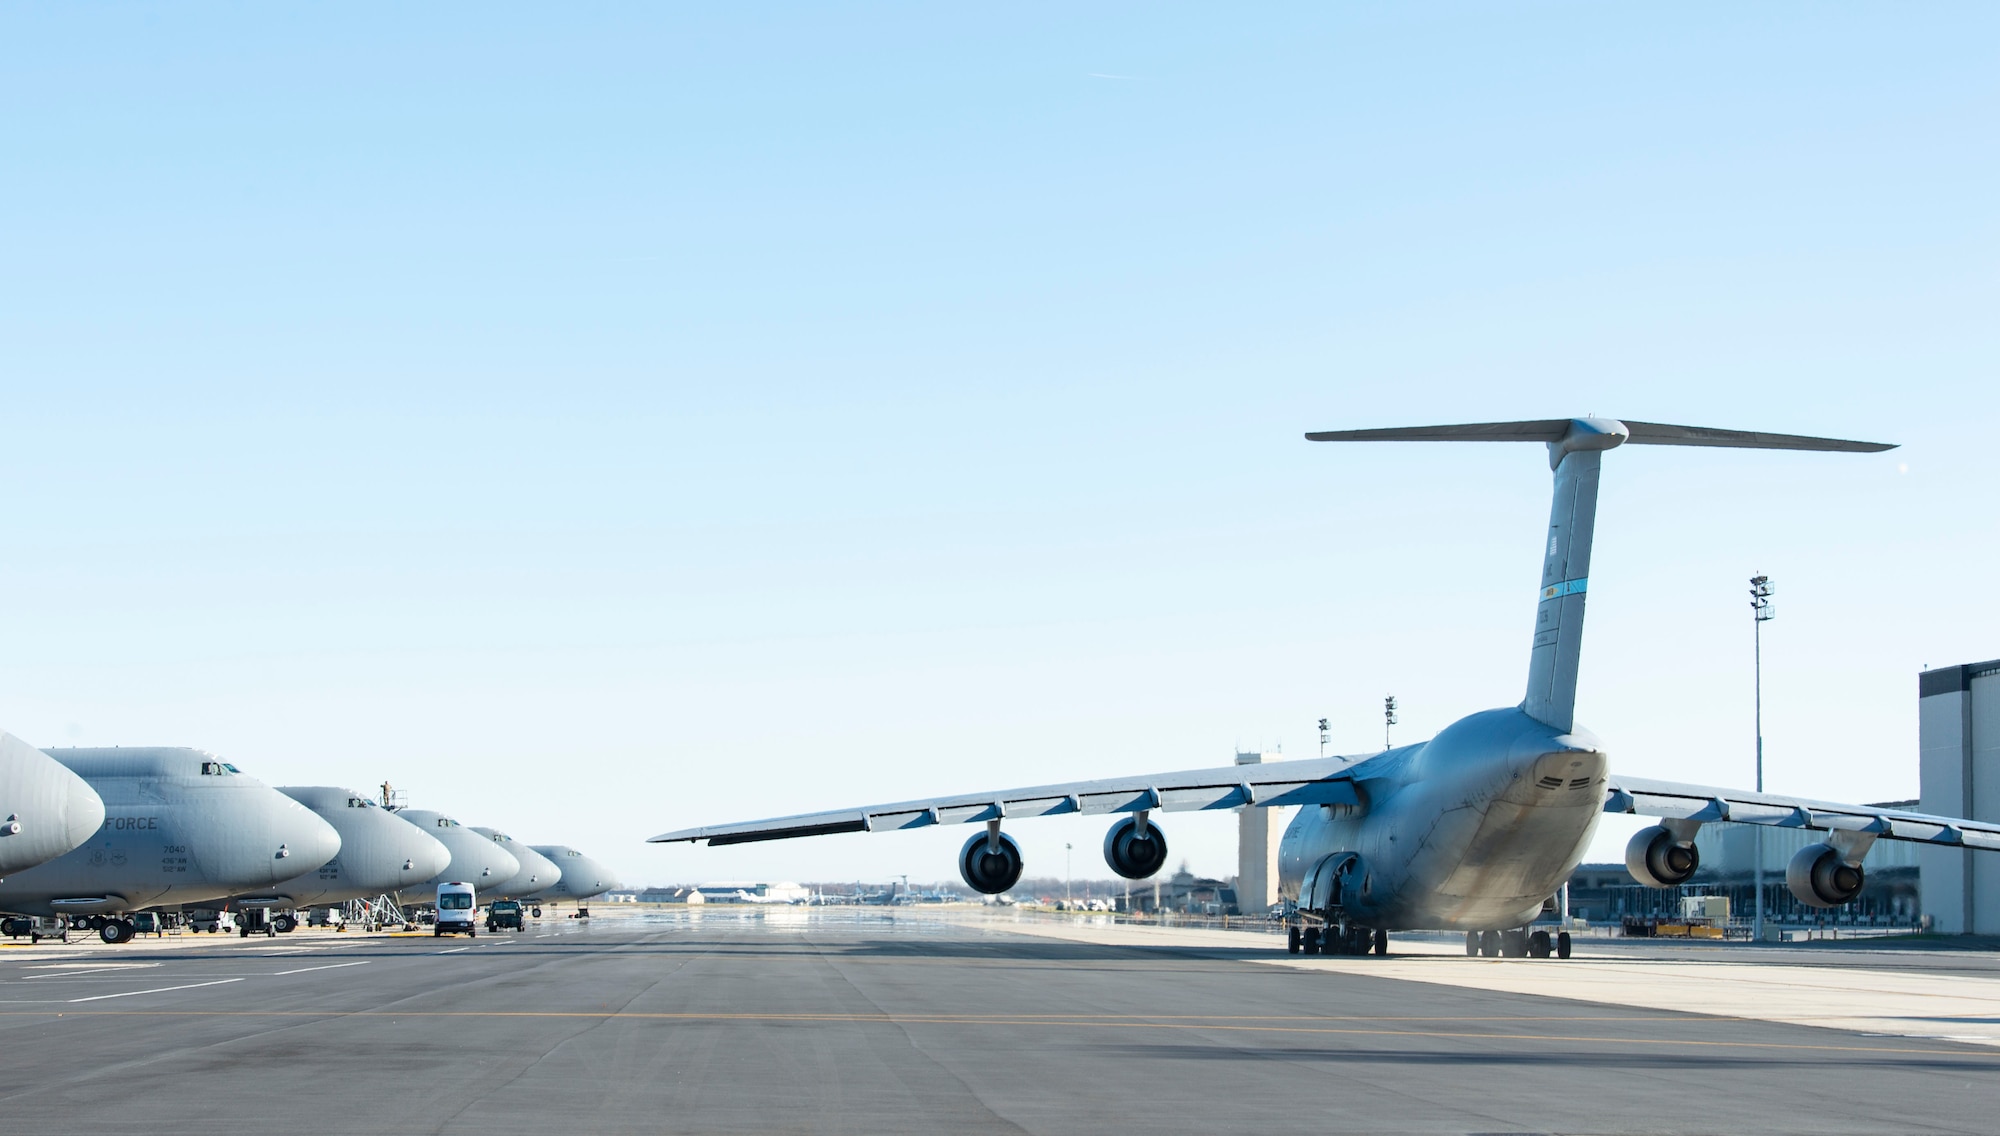 A C-5M Super Galaxy taxis down the flight line prior to takeoff at Dover Air Force Base, Delaware, Dec. 20, 2021. Eighteen C-5M’s are assigned to Dover AFB, along with 13 C-17 Globemaster IIIs that provide 20 percent of the nation’s outsized airlift capacity. (U.S. Air Force photo by Roland Balik)